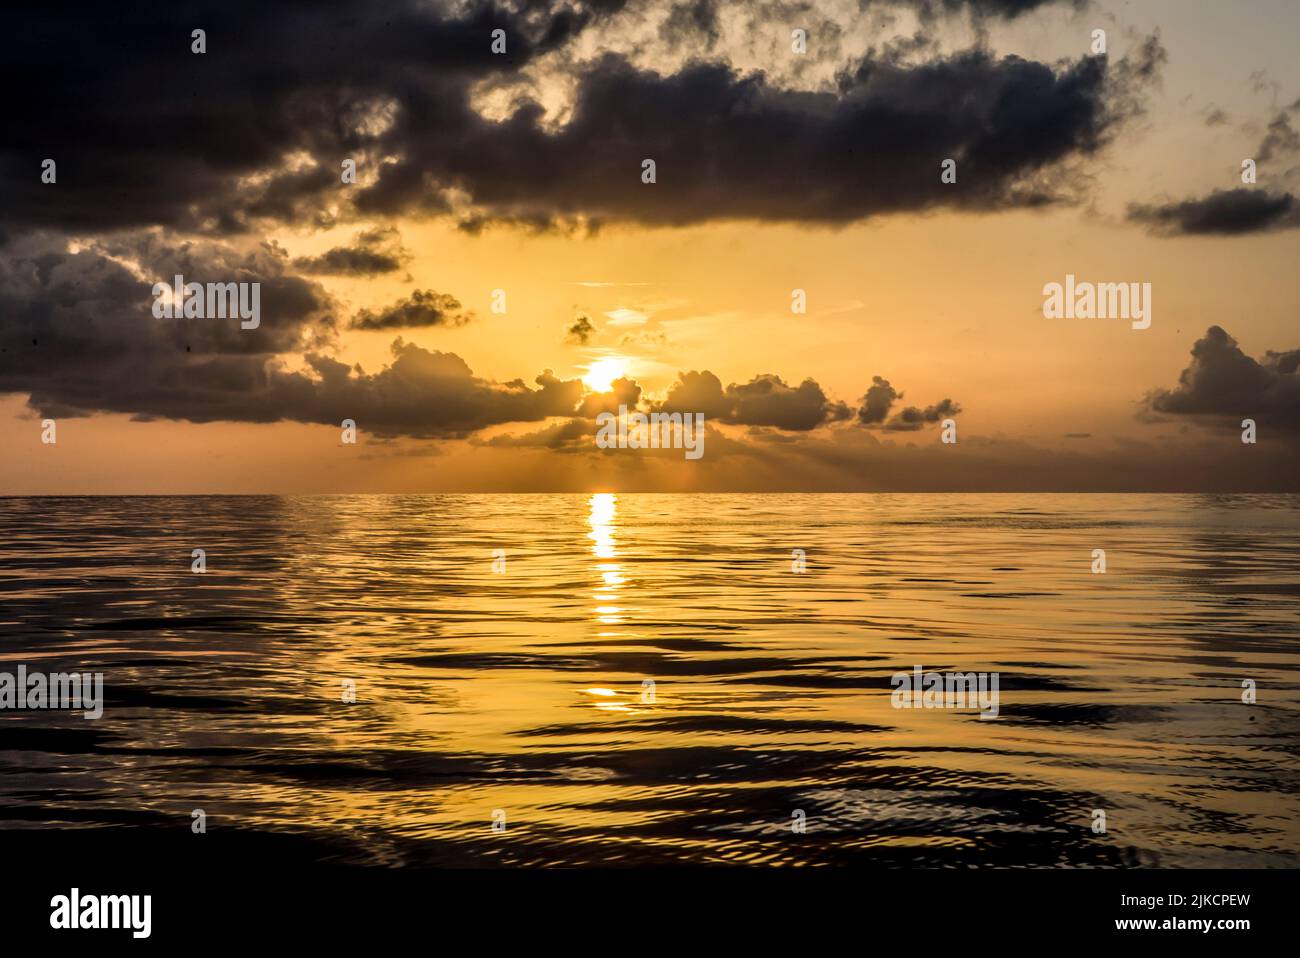 View of Gulf of Mexico from an offshore platform at sunset Stock Photo